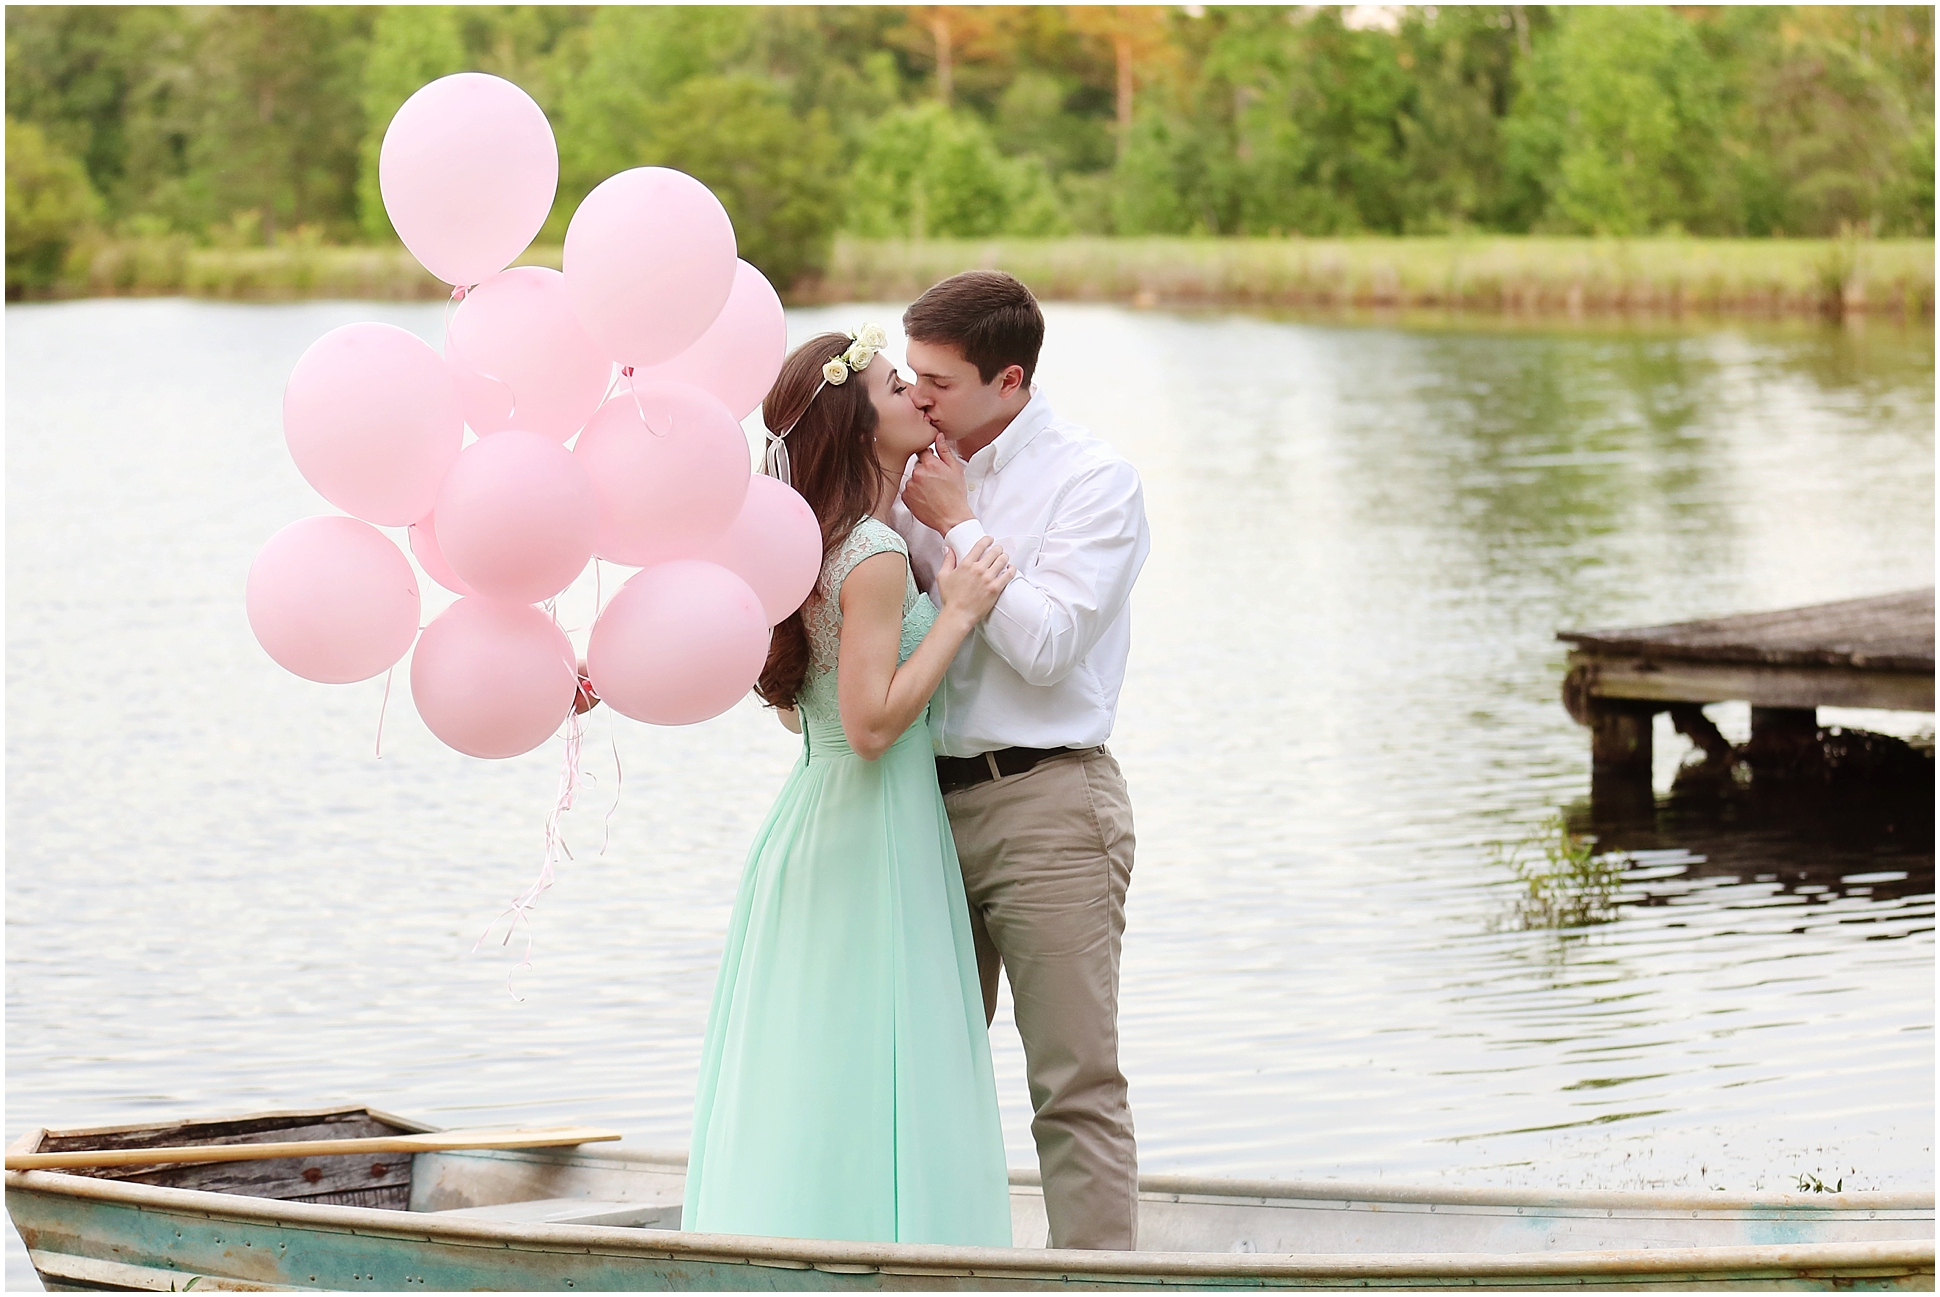 Picnic Inspired Engagement Session | Two Chics Photography | www.twochicsphotography.com